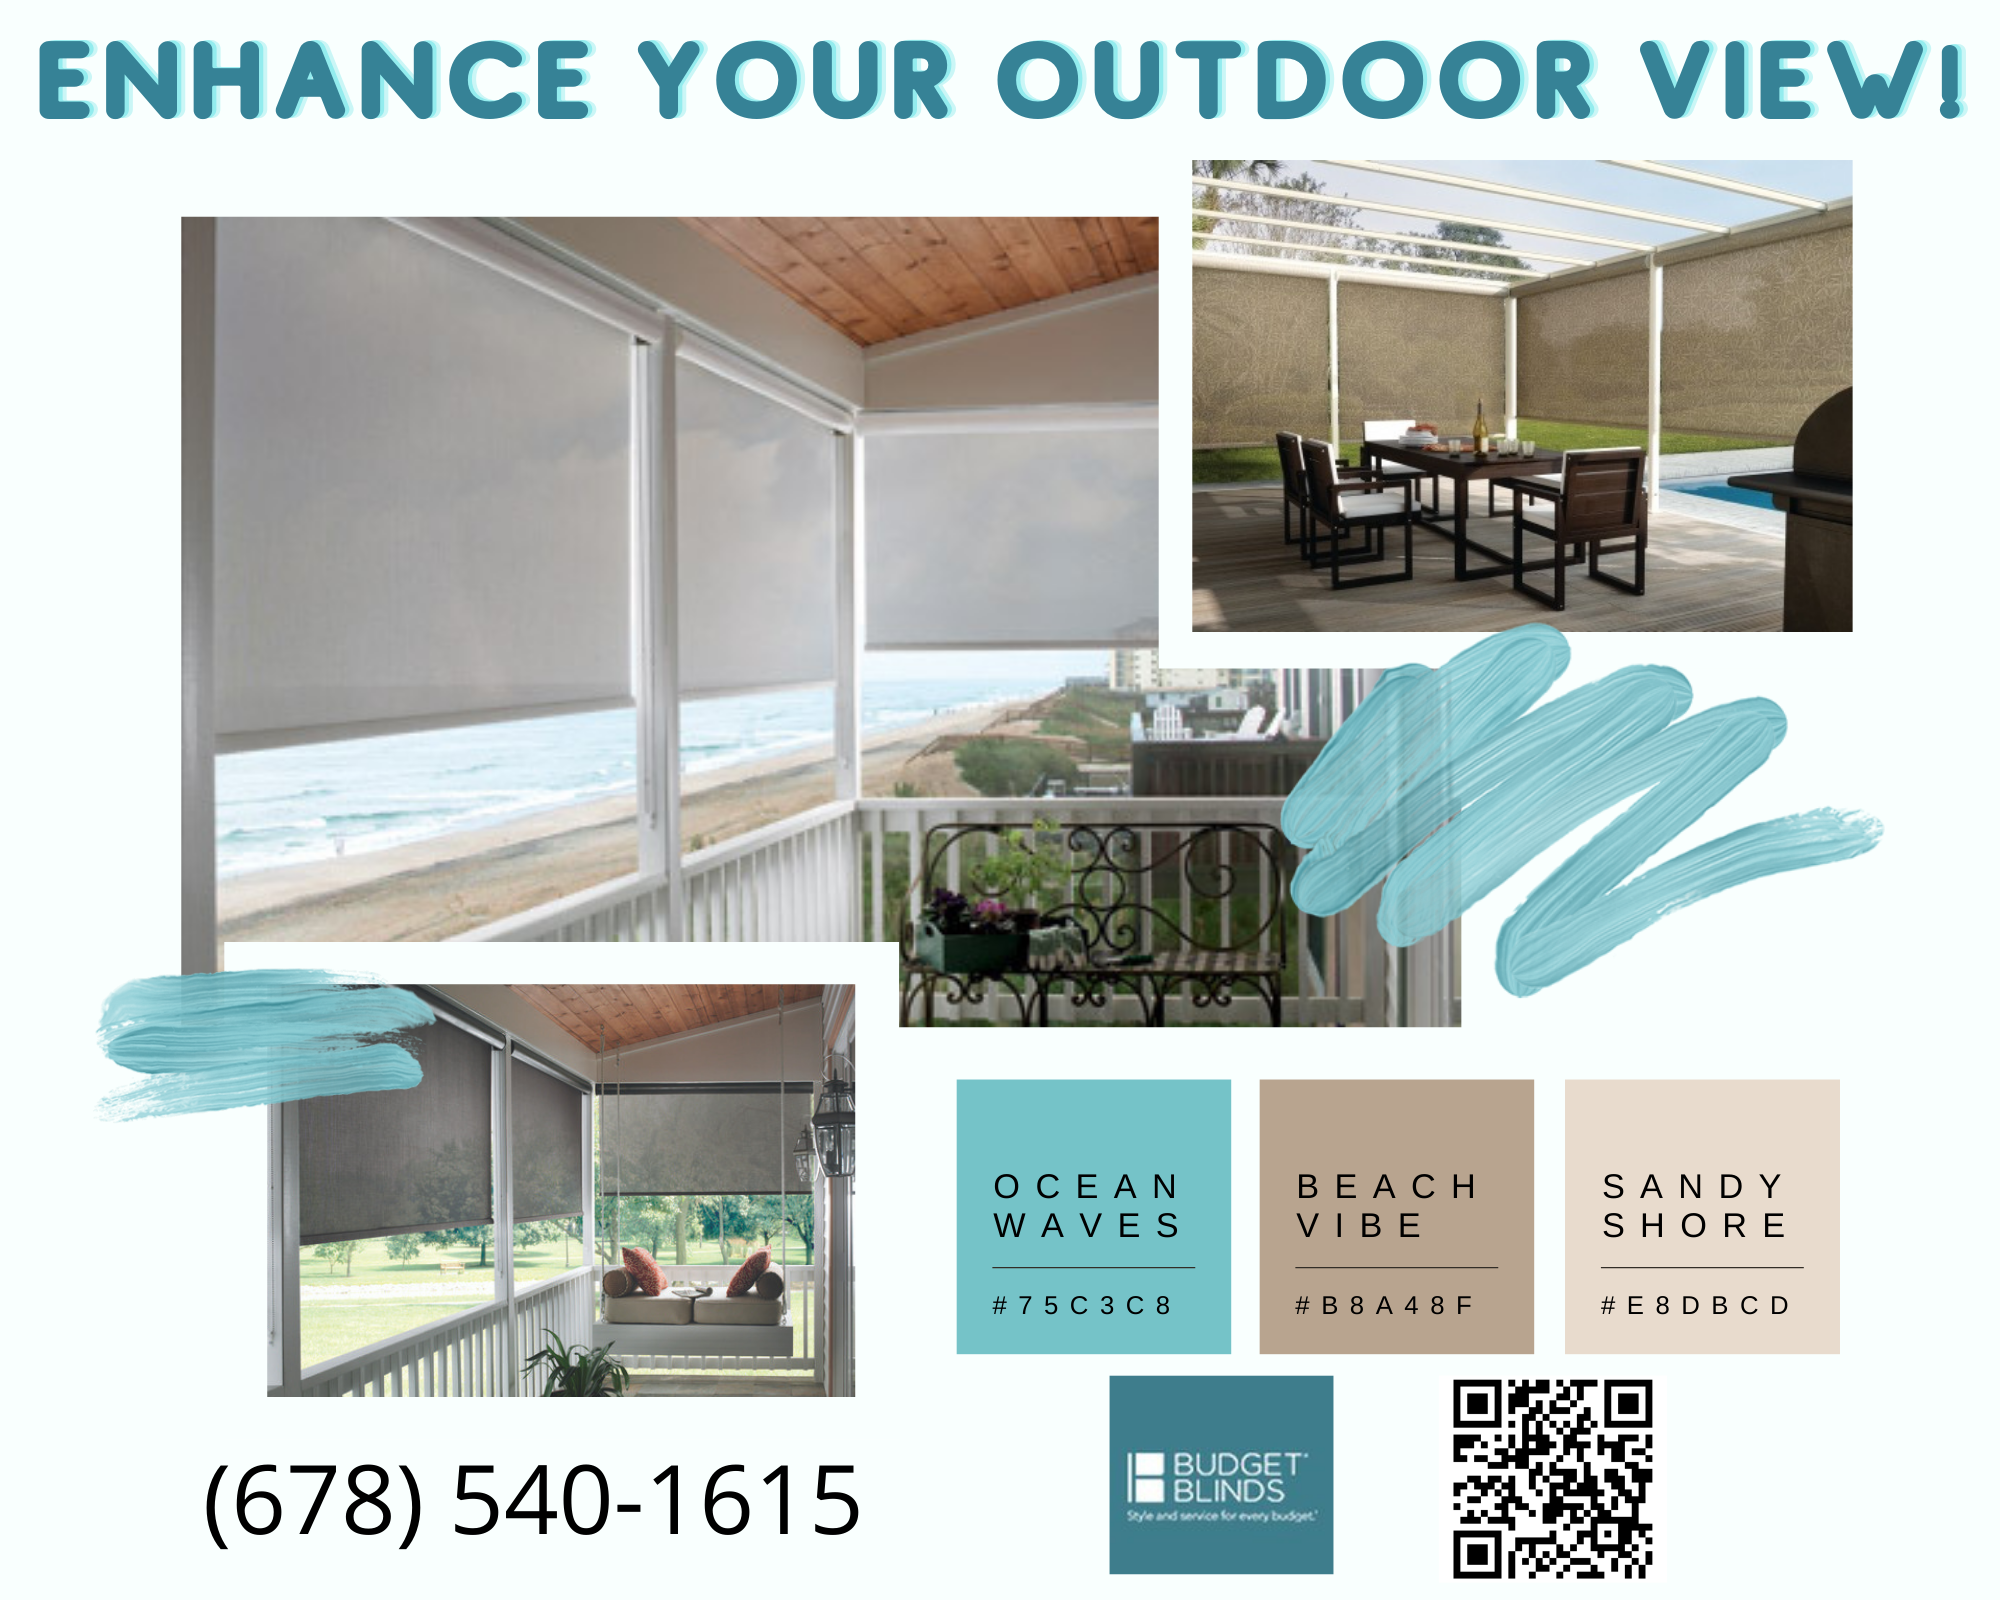 Enhance your outdoor view with Exterior Shades